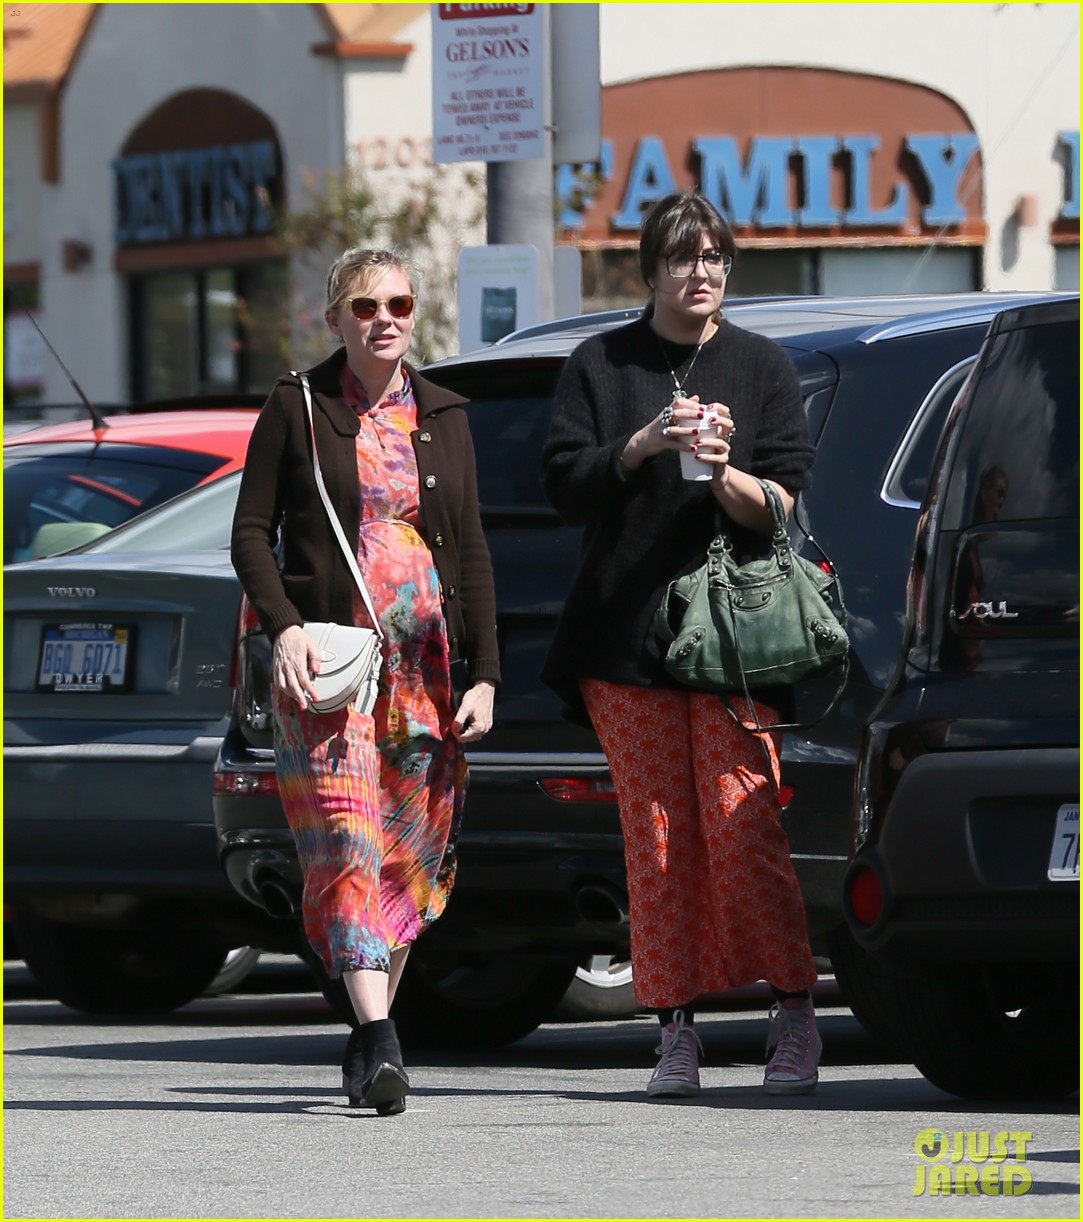 pregnant-kirsten-dunst-kicks-off-her-weekend-at-the-grocery-store-09